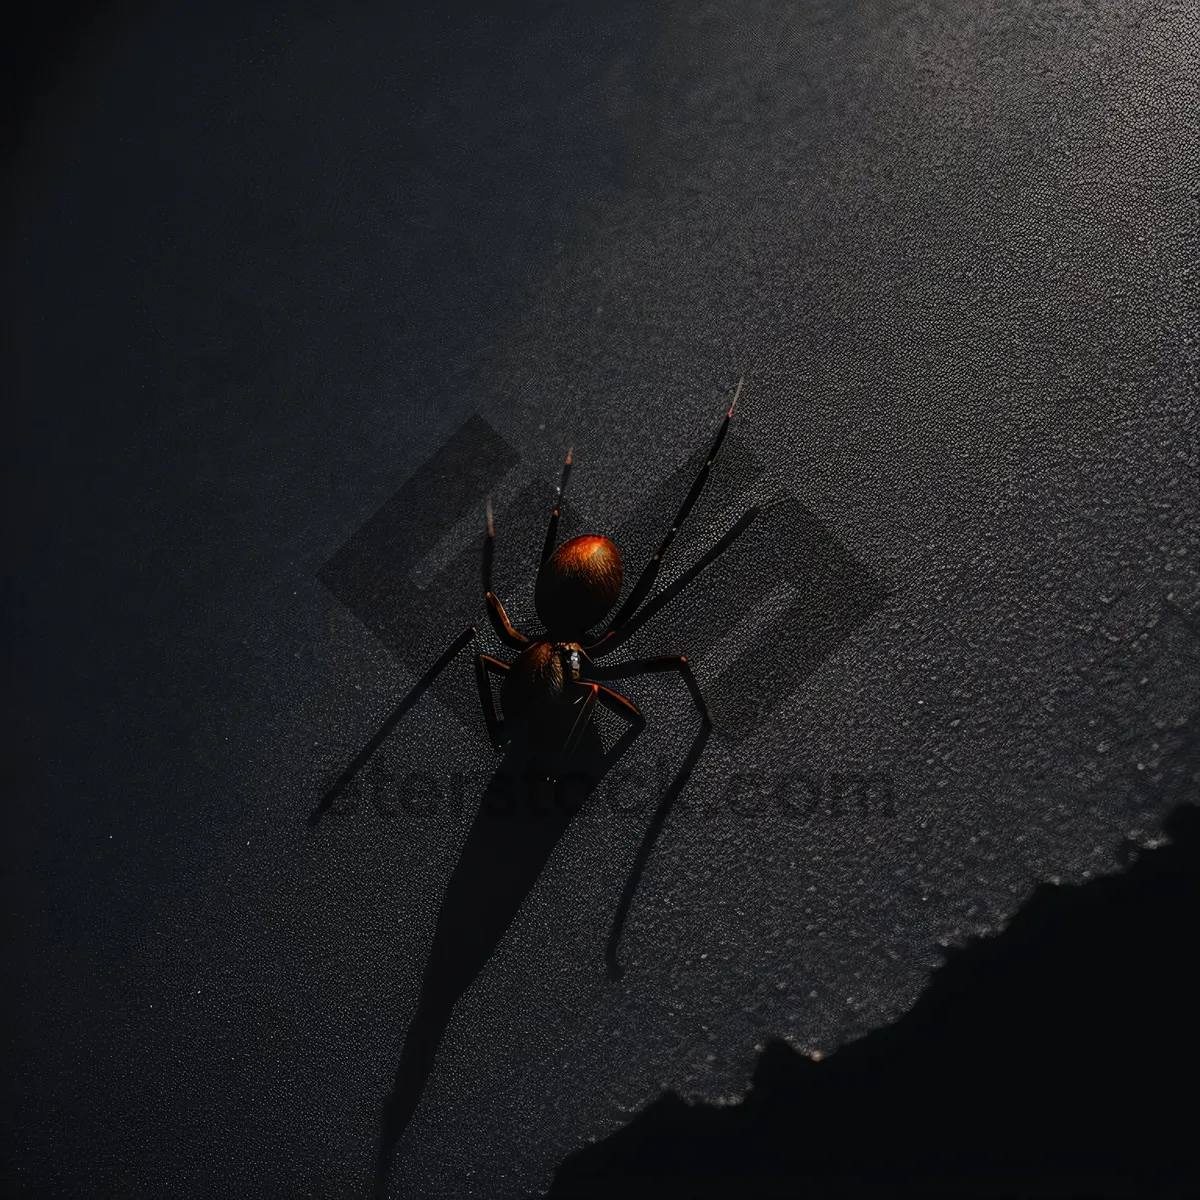 Picture of Black Widow Spider on Green Leaf